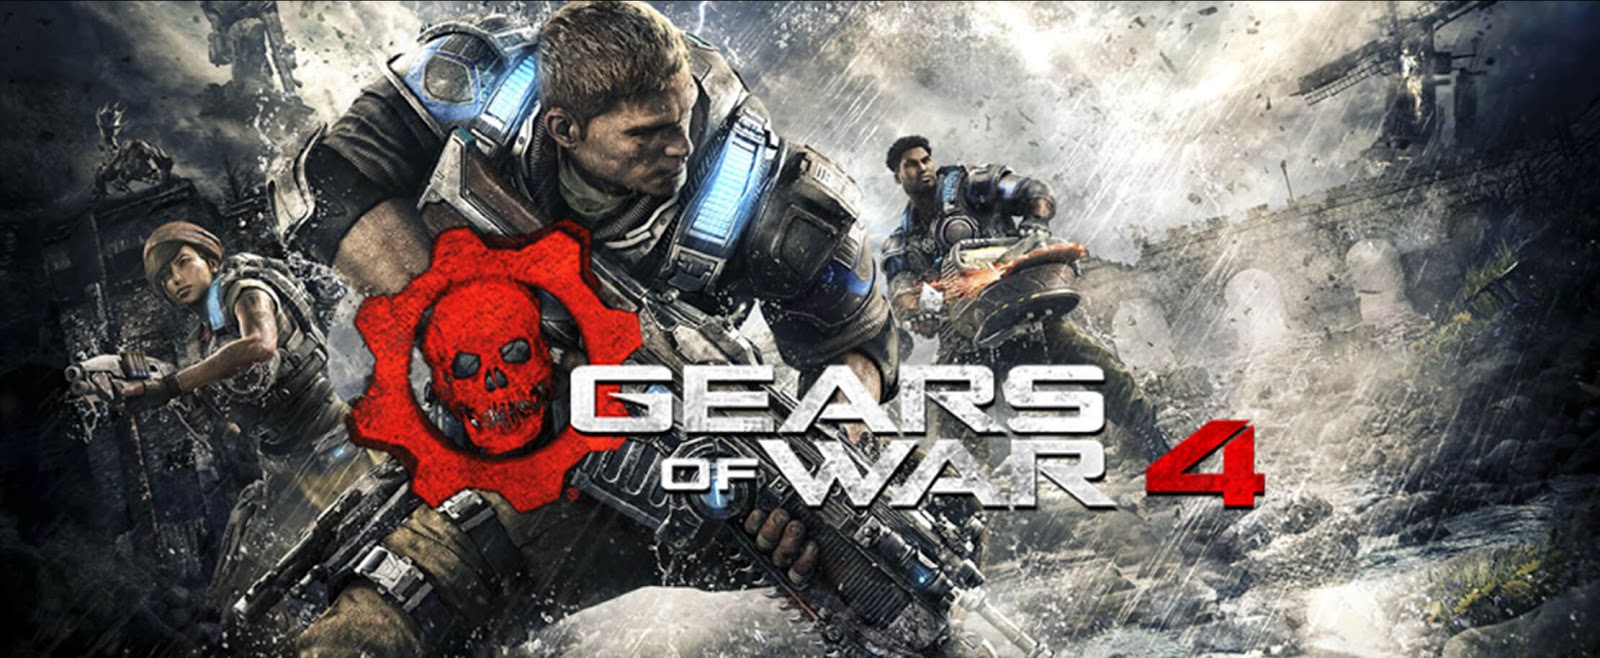 gears of war 2 pc download full ripped